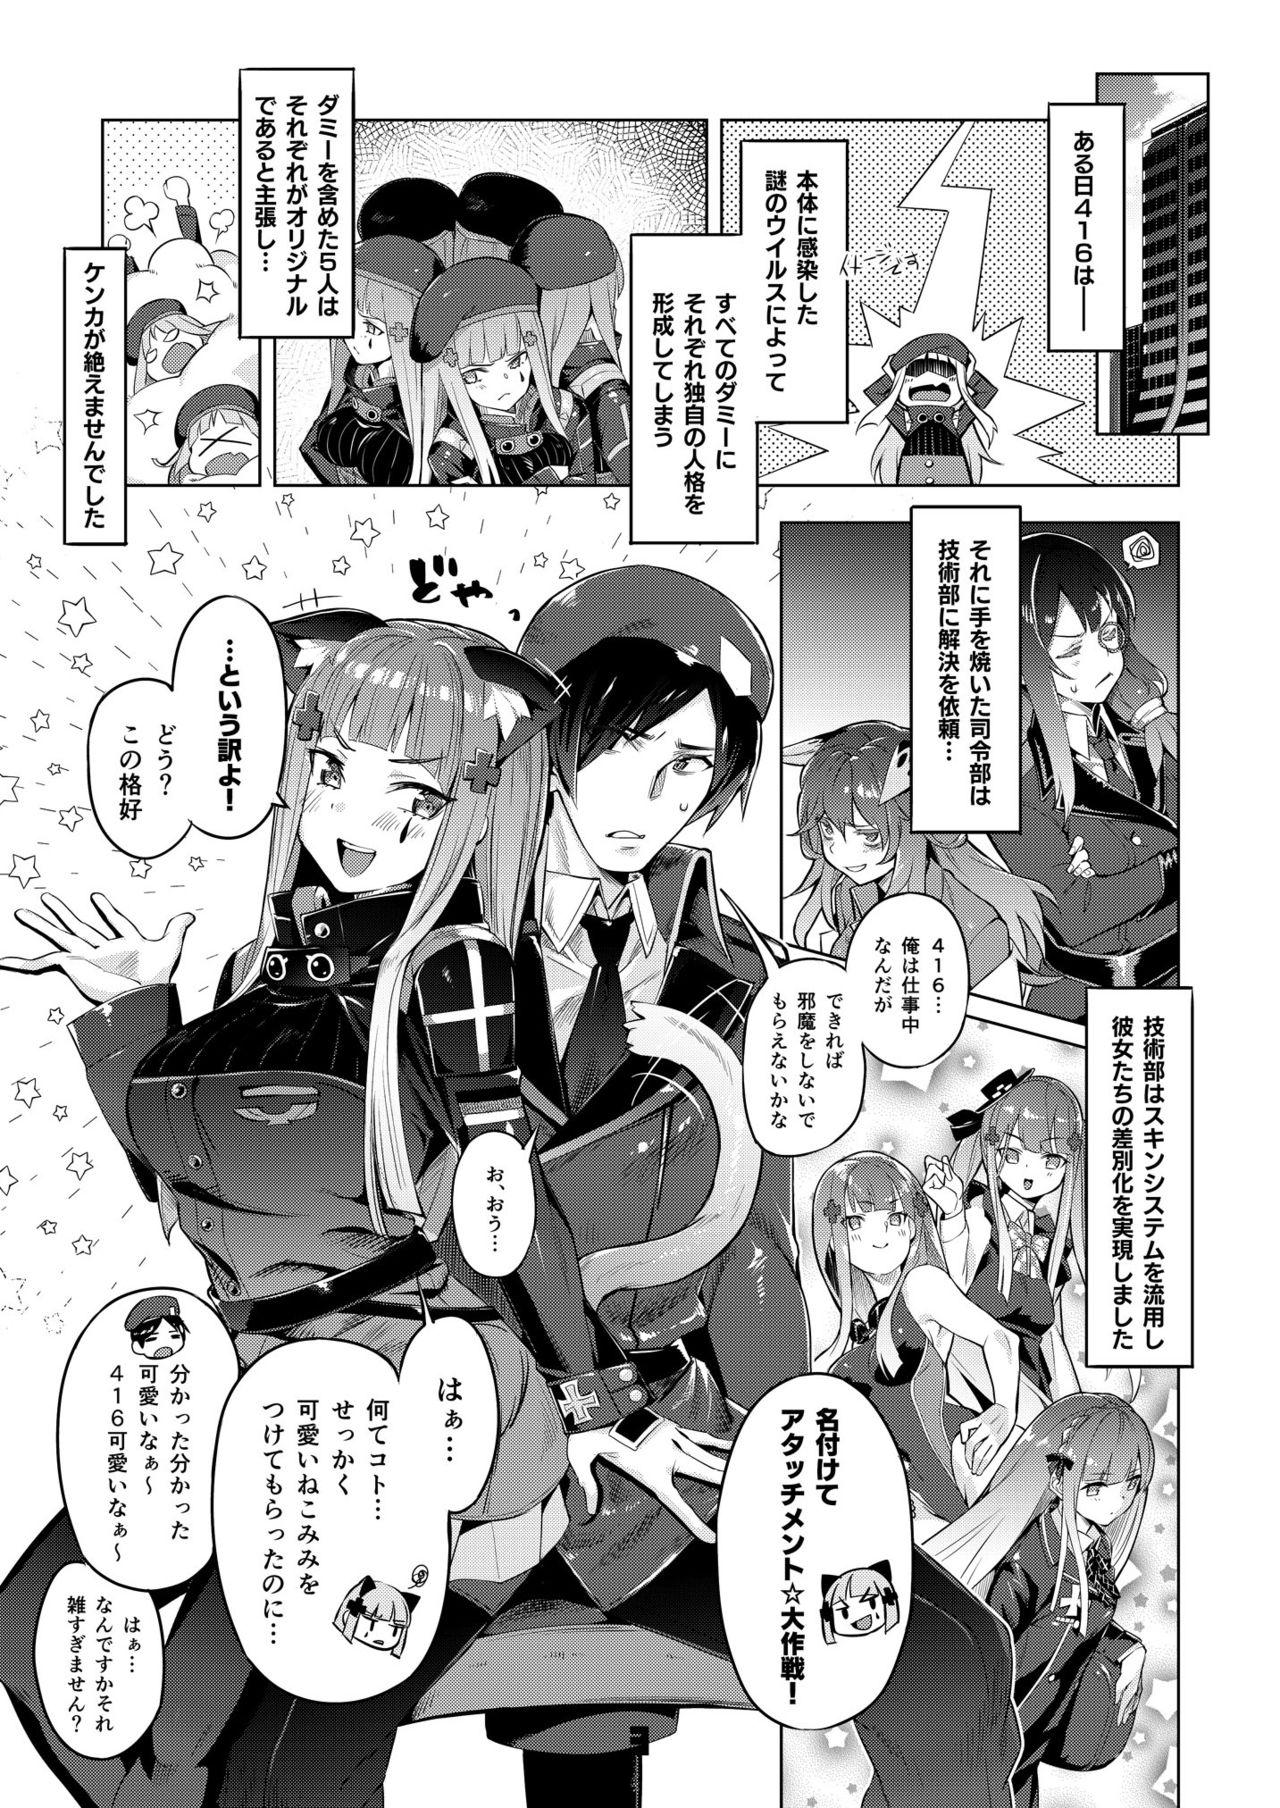 With Nekomimi Attachment - Girls frontline Ass Fucking - Page 3